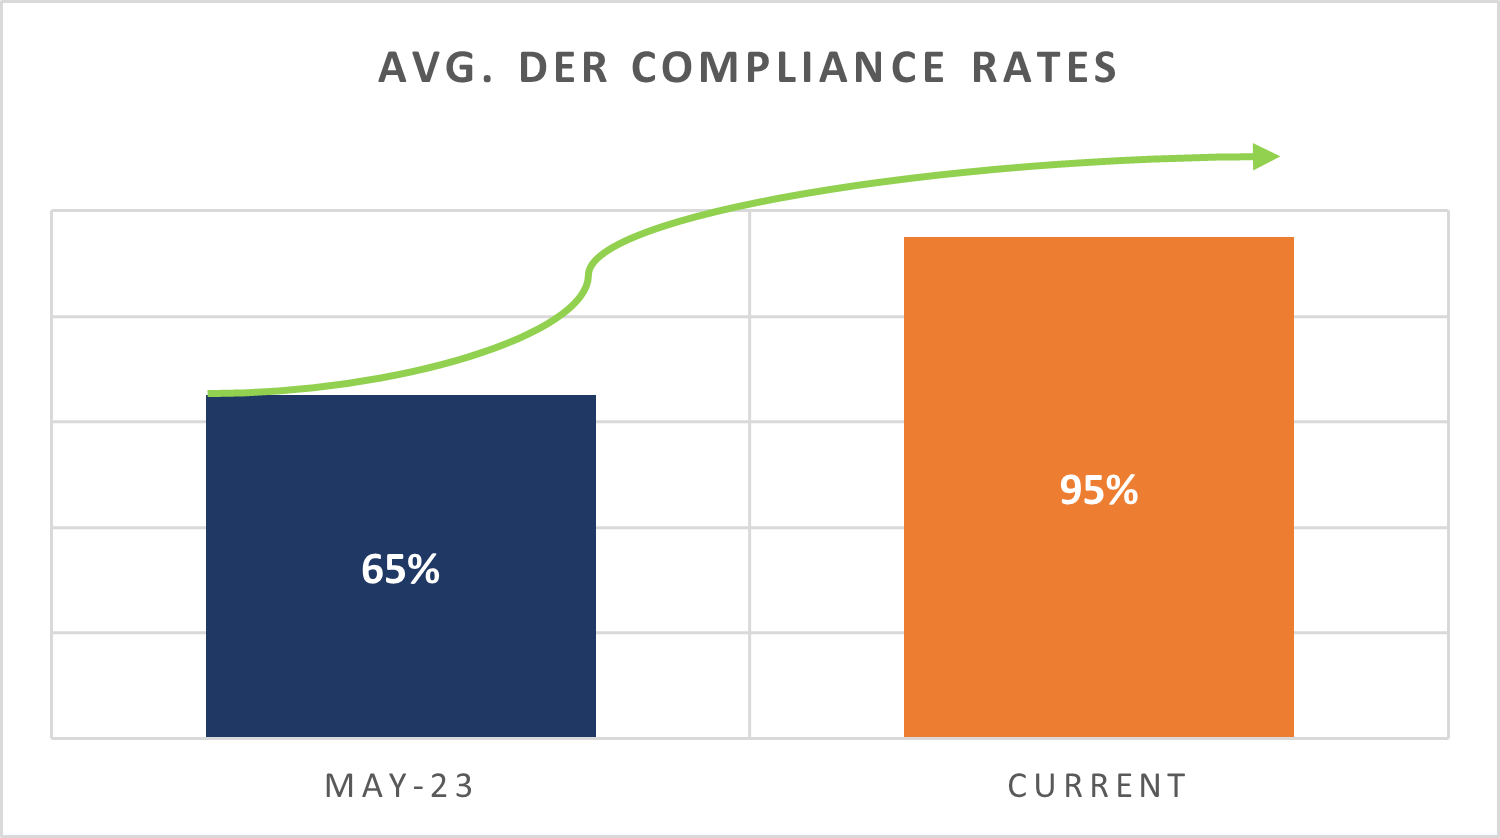 Bar graph showing DER compliance rates over time from May 2023 - March 2024.